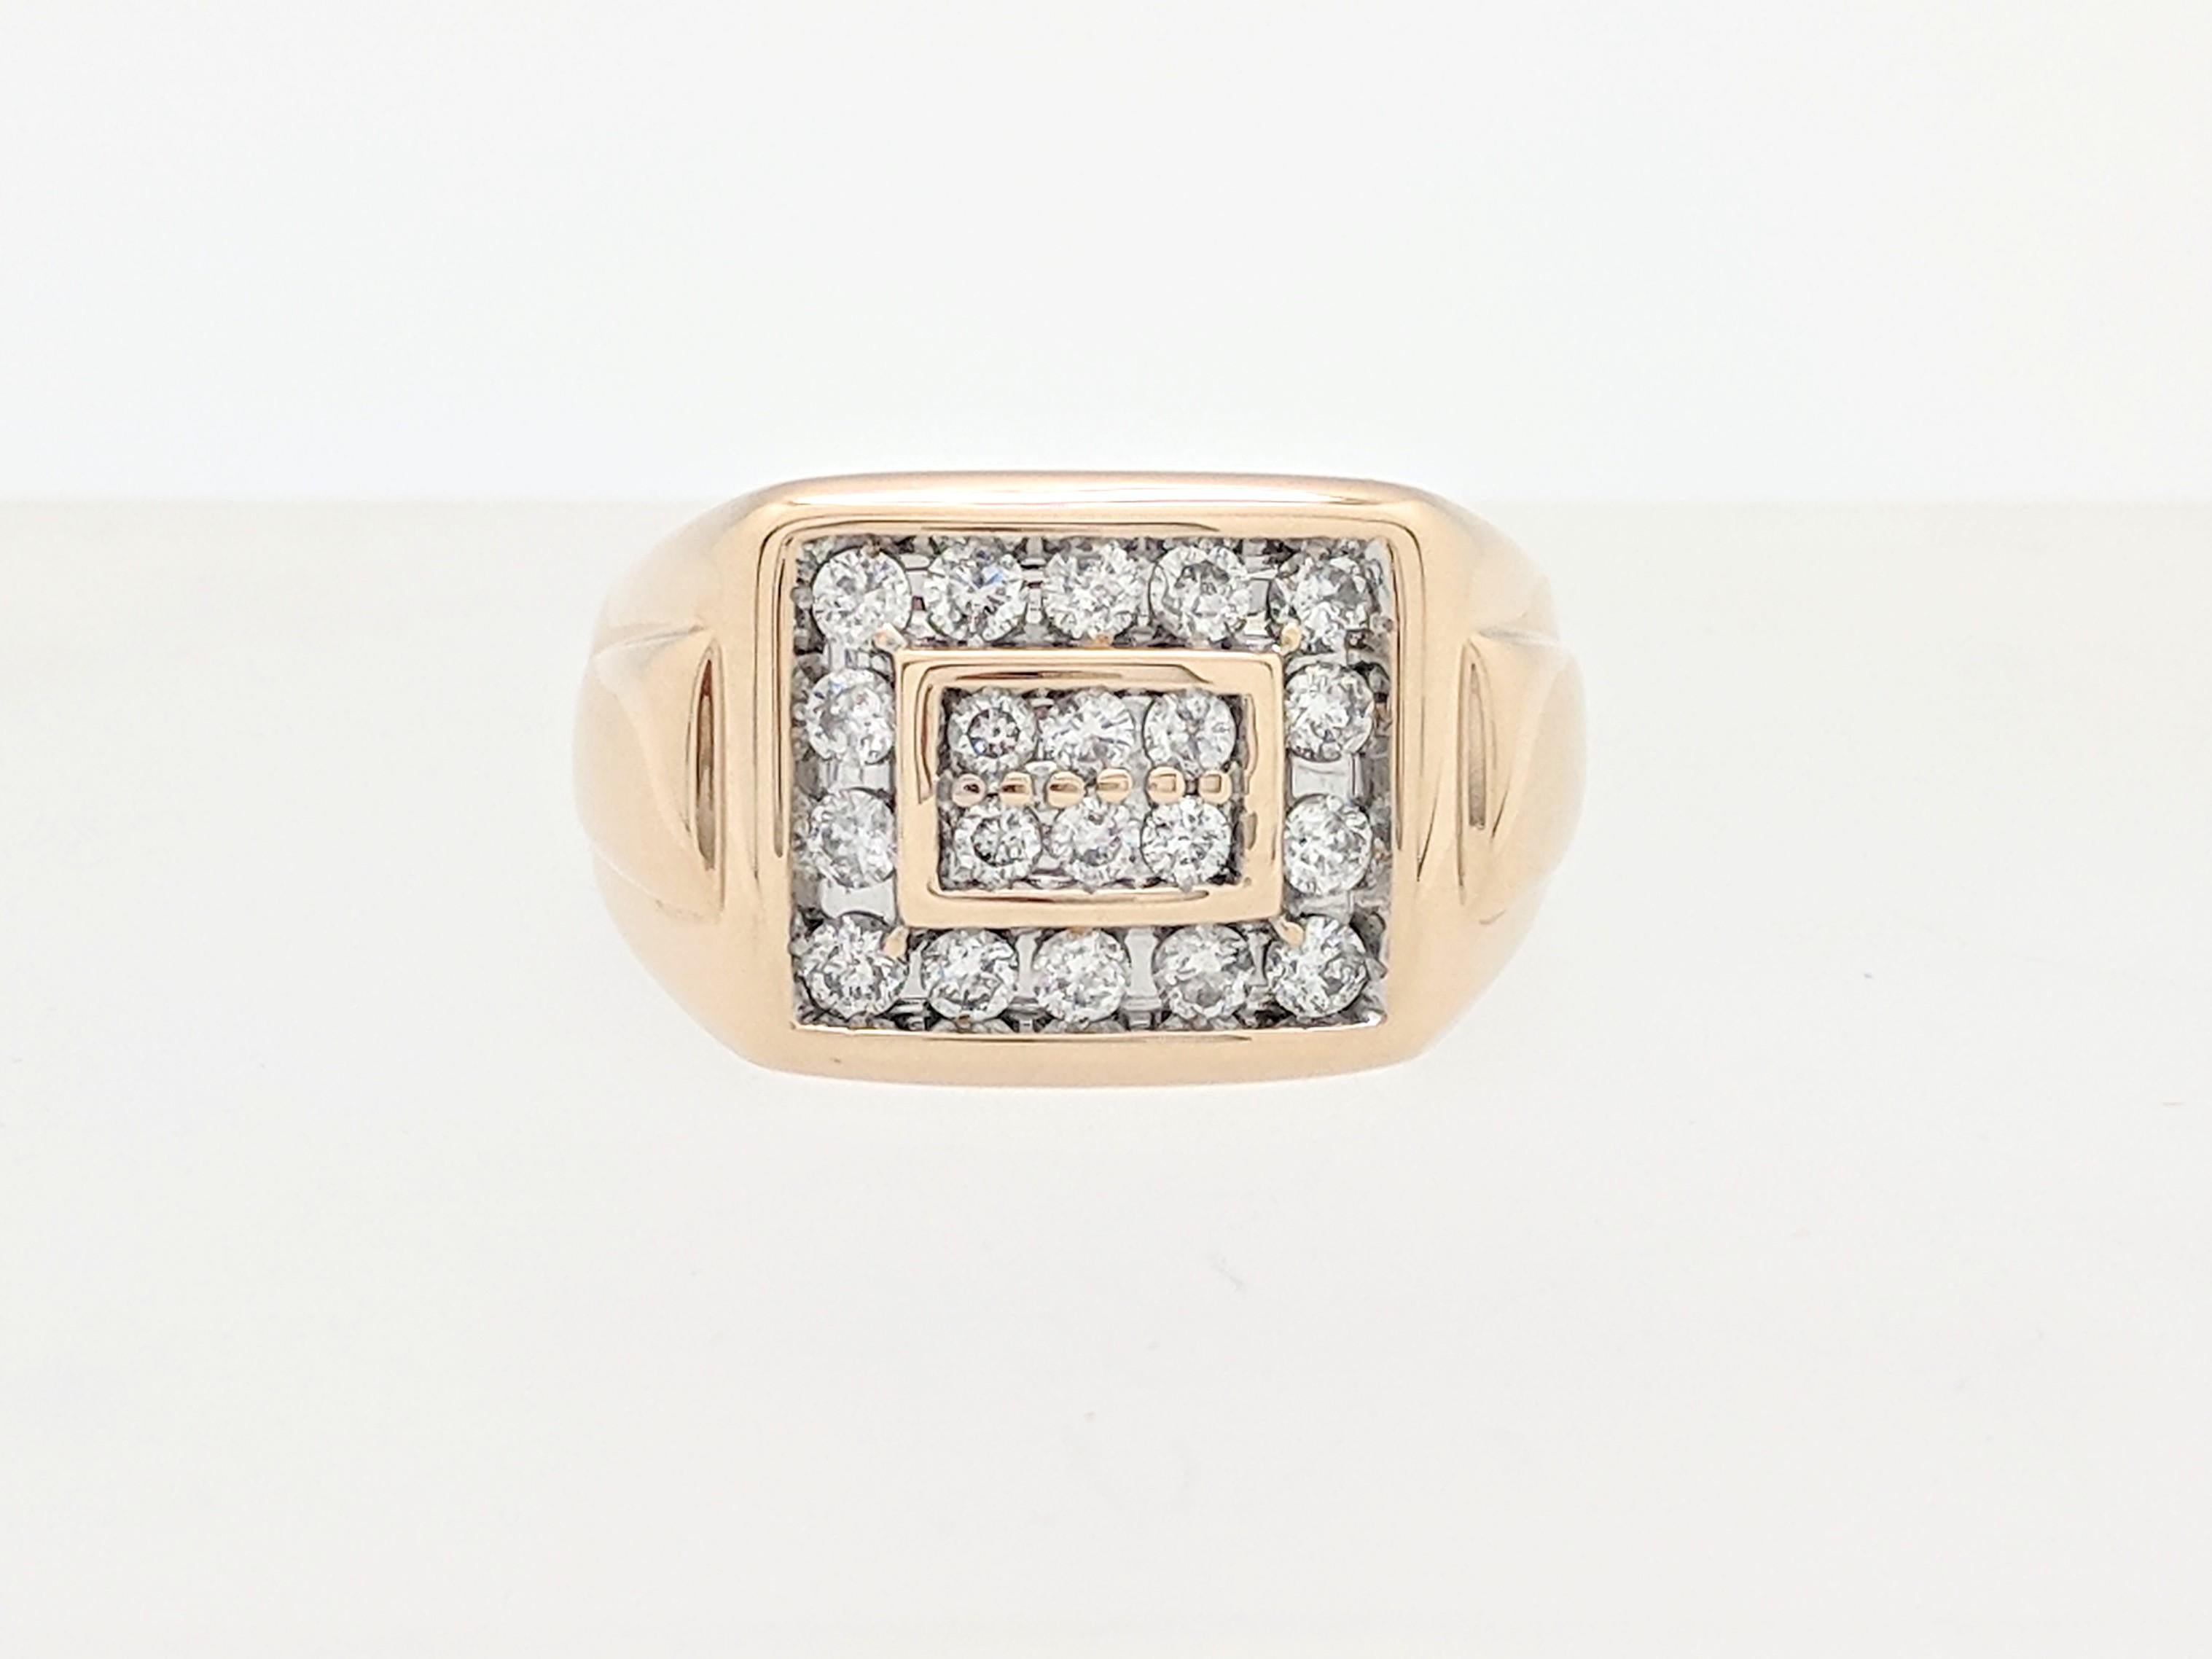 You are viewing a men's diamond cluster ring hand ring. This ring is crafted from 14k yellow gold and weighs 12.4 grams. It features (20) .05ct round natural brilliant cut diamonds for an estimated 1 carat total weight. We estimate the diamonds to